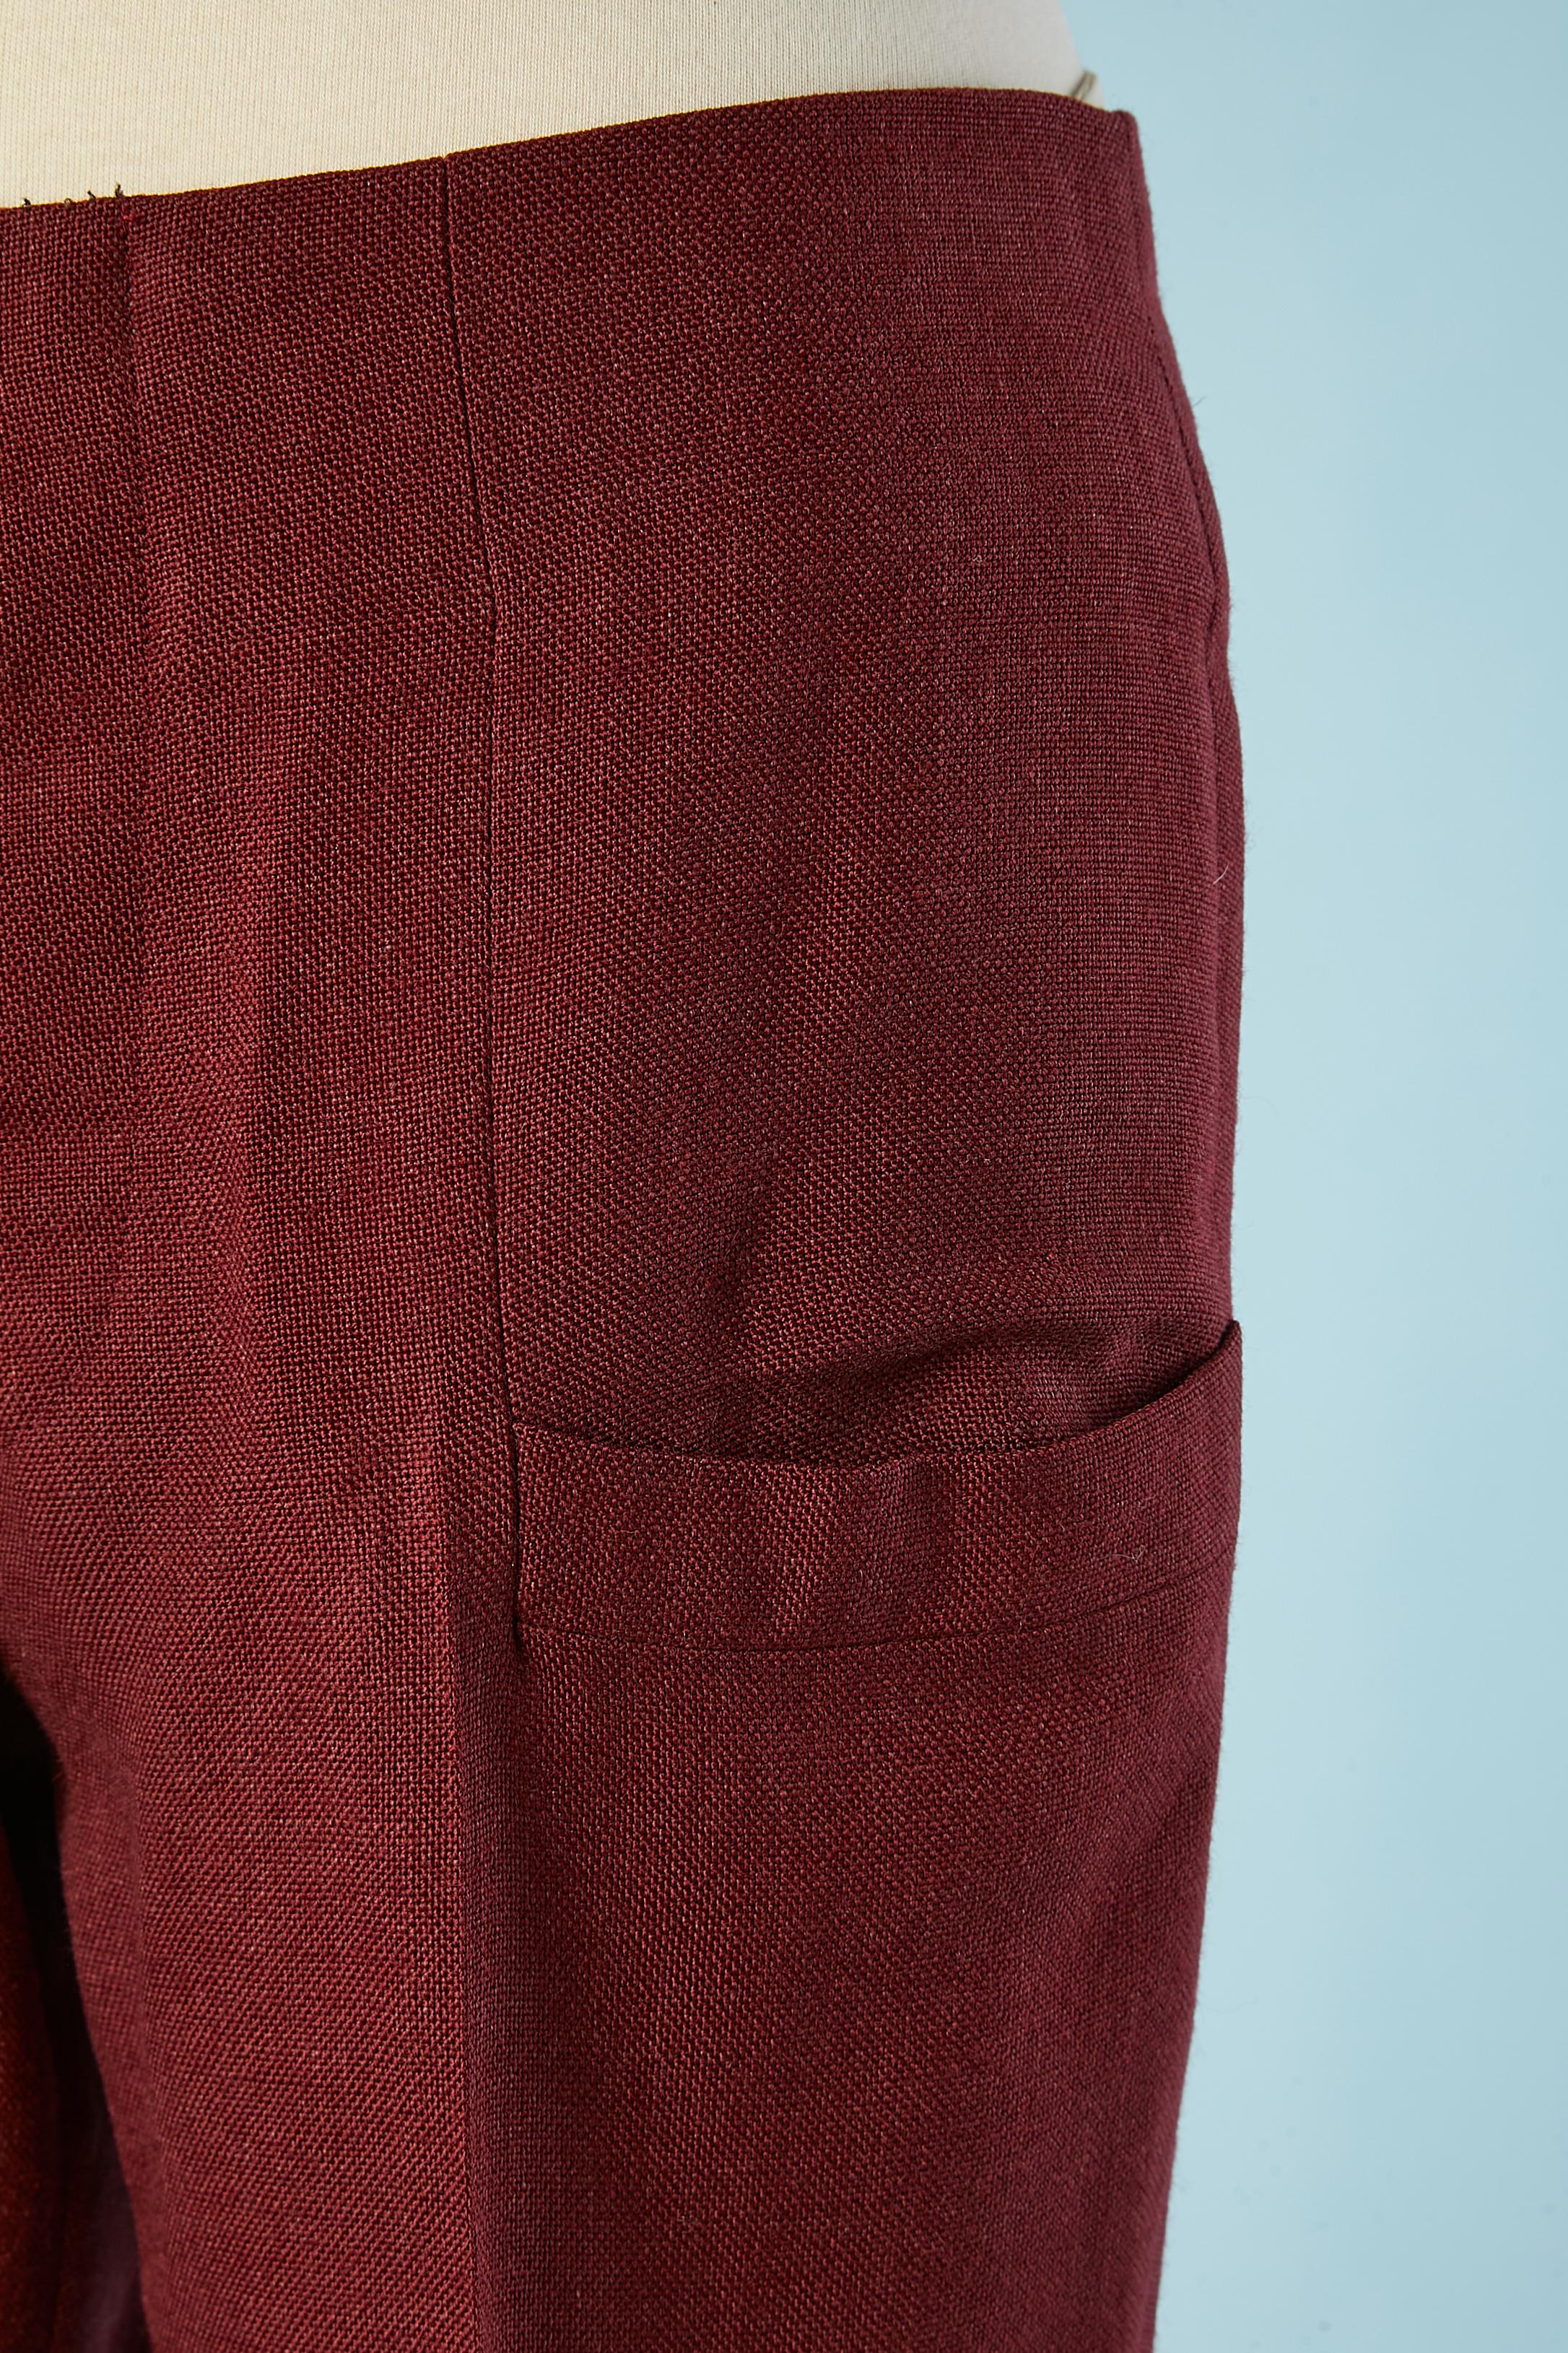 Burgundy linen and acrylic high-waisted trouser. Button placket inside the waist. 
Buttons and buttonholes closure in the top middle front. Nylon lining inside the pocket and nylon waist. 
SIZE L 